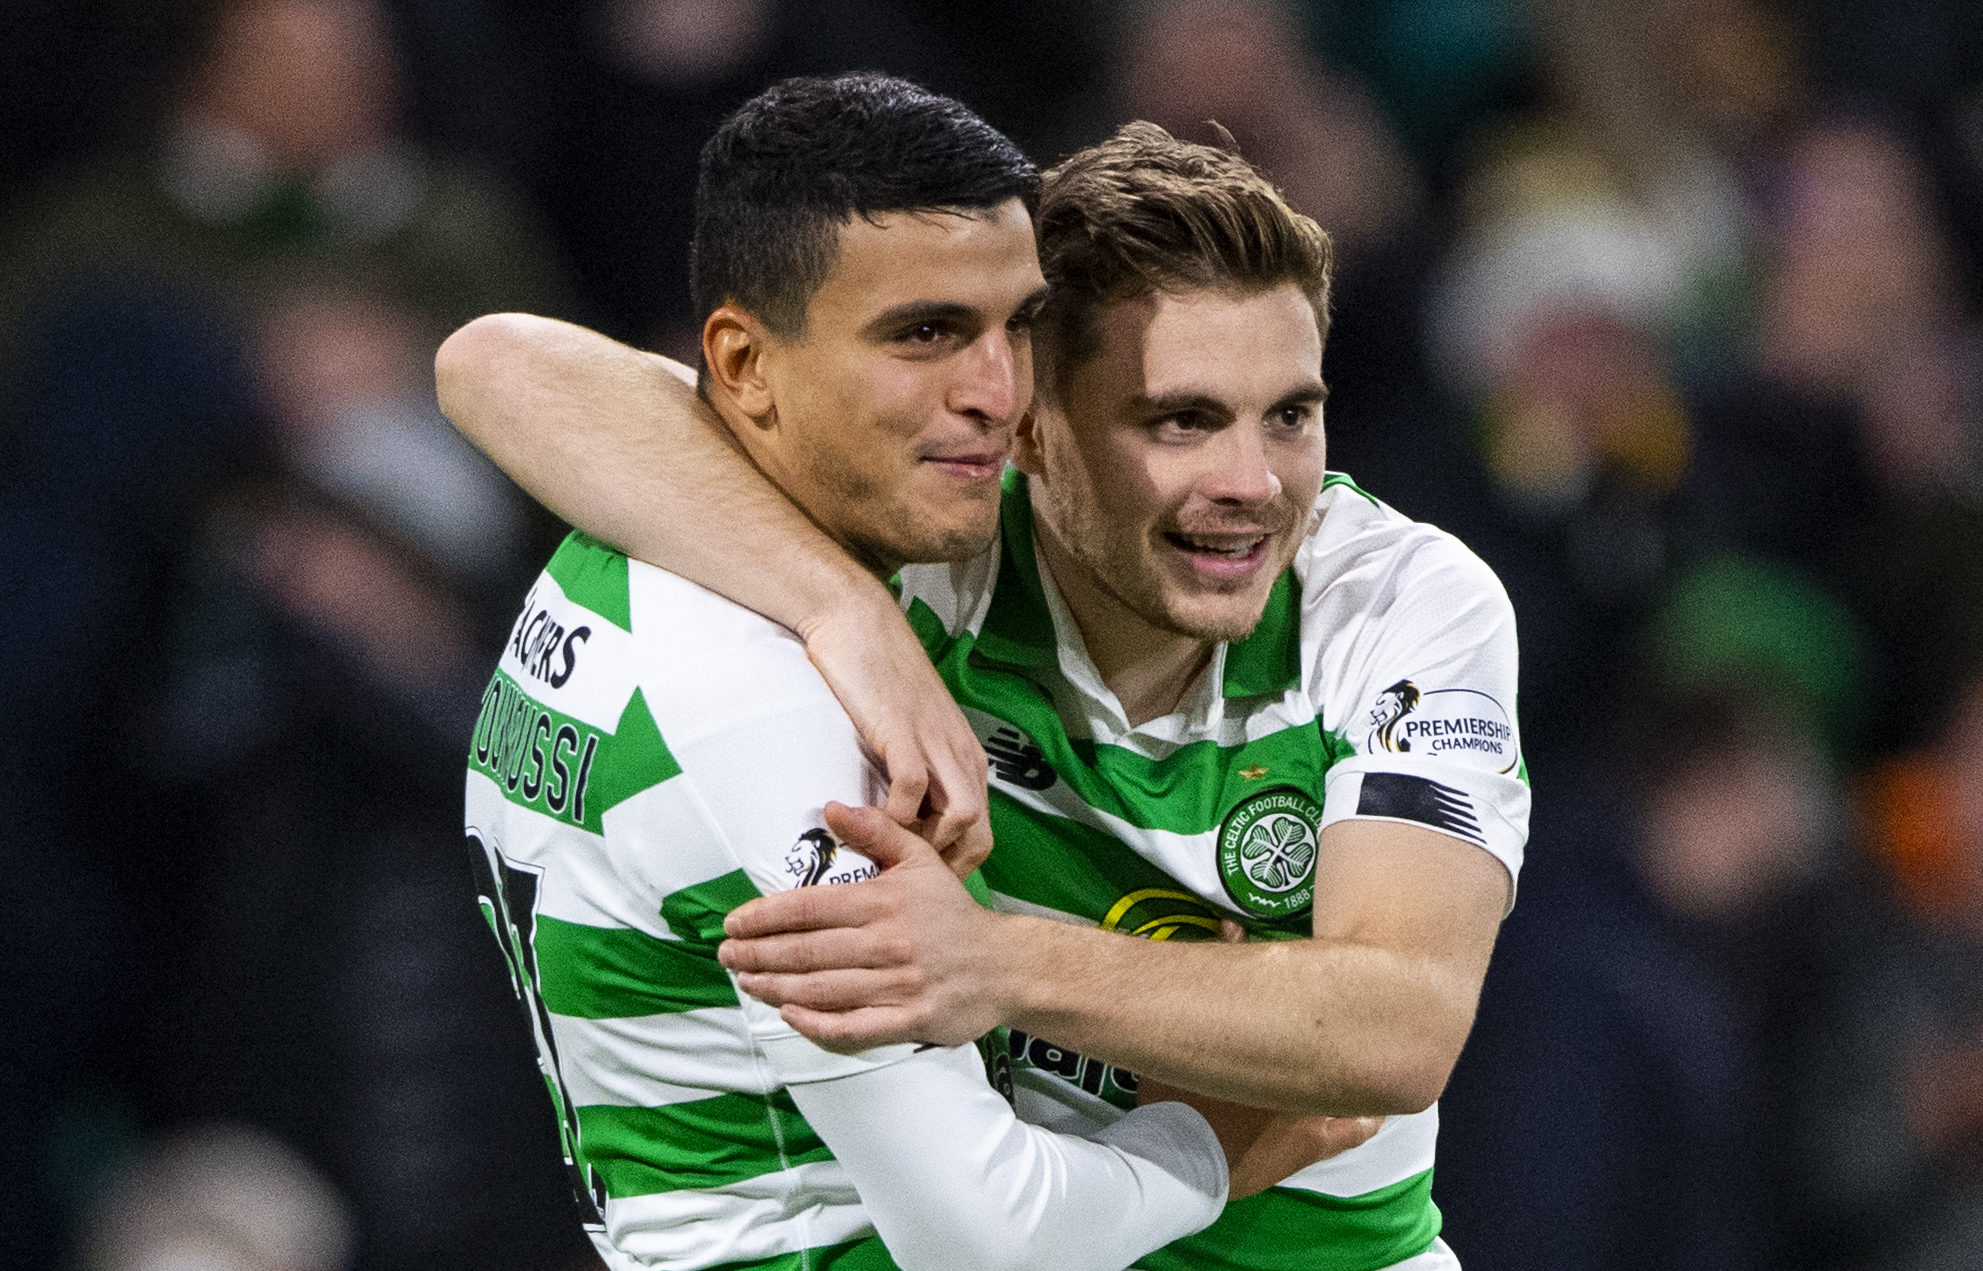 Celtic's James Forrest celebrates with Mohammed Elyounoussi